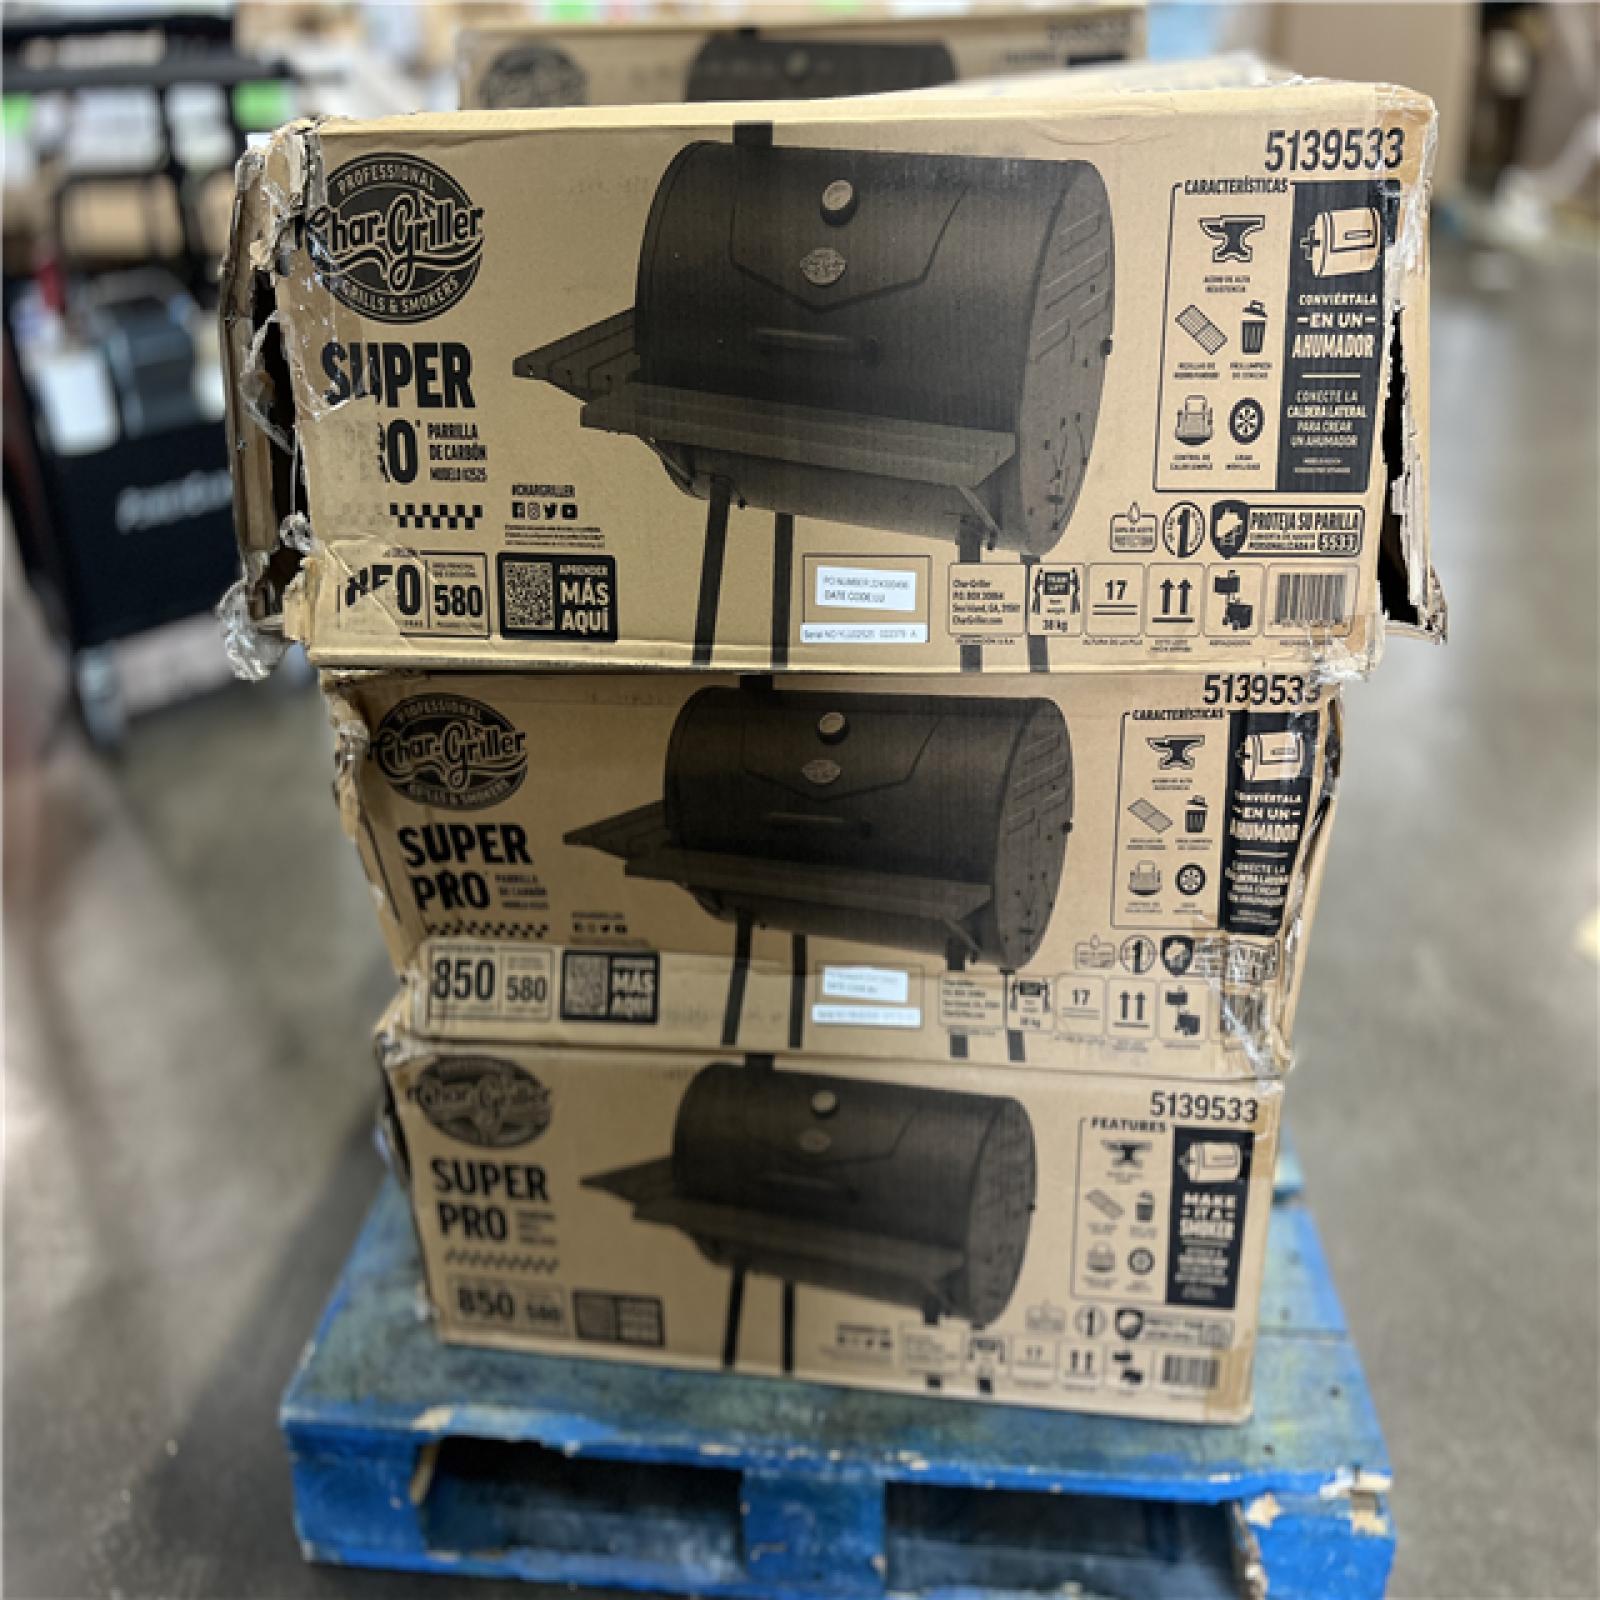 DALLAS LOCATION - Char-Griller Super Pro Charcoal Grill 30-in W Black Barrel Charcoal Grill PALLET - (6 UNITS)